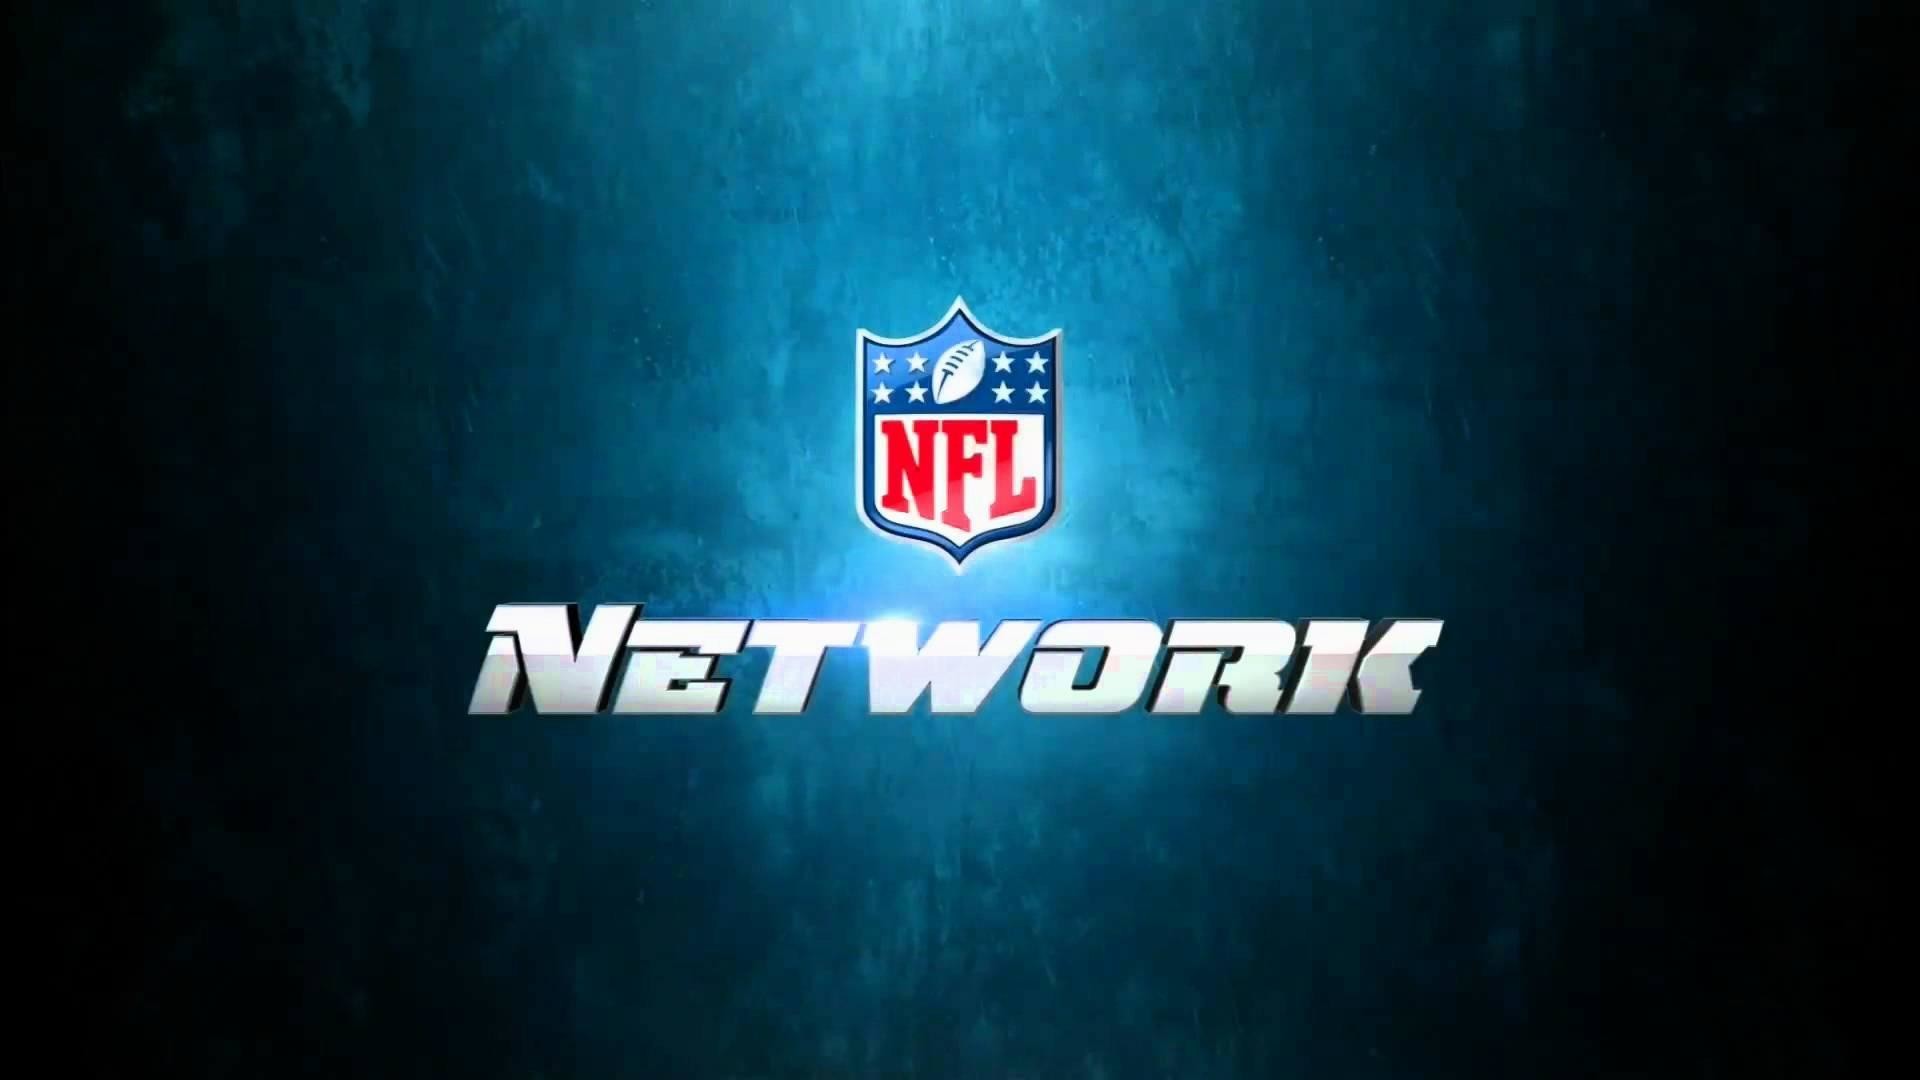 NFL Wallpapers HD